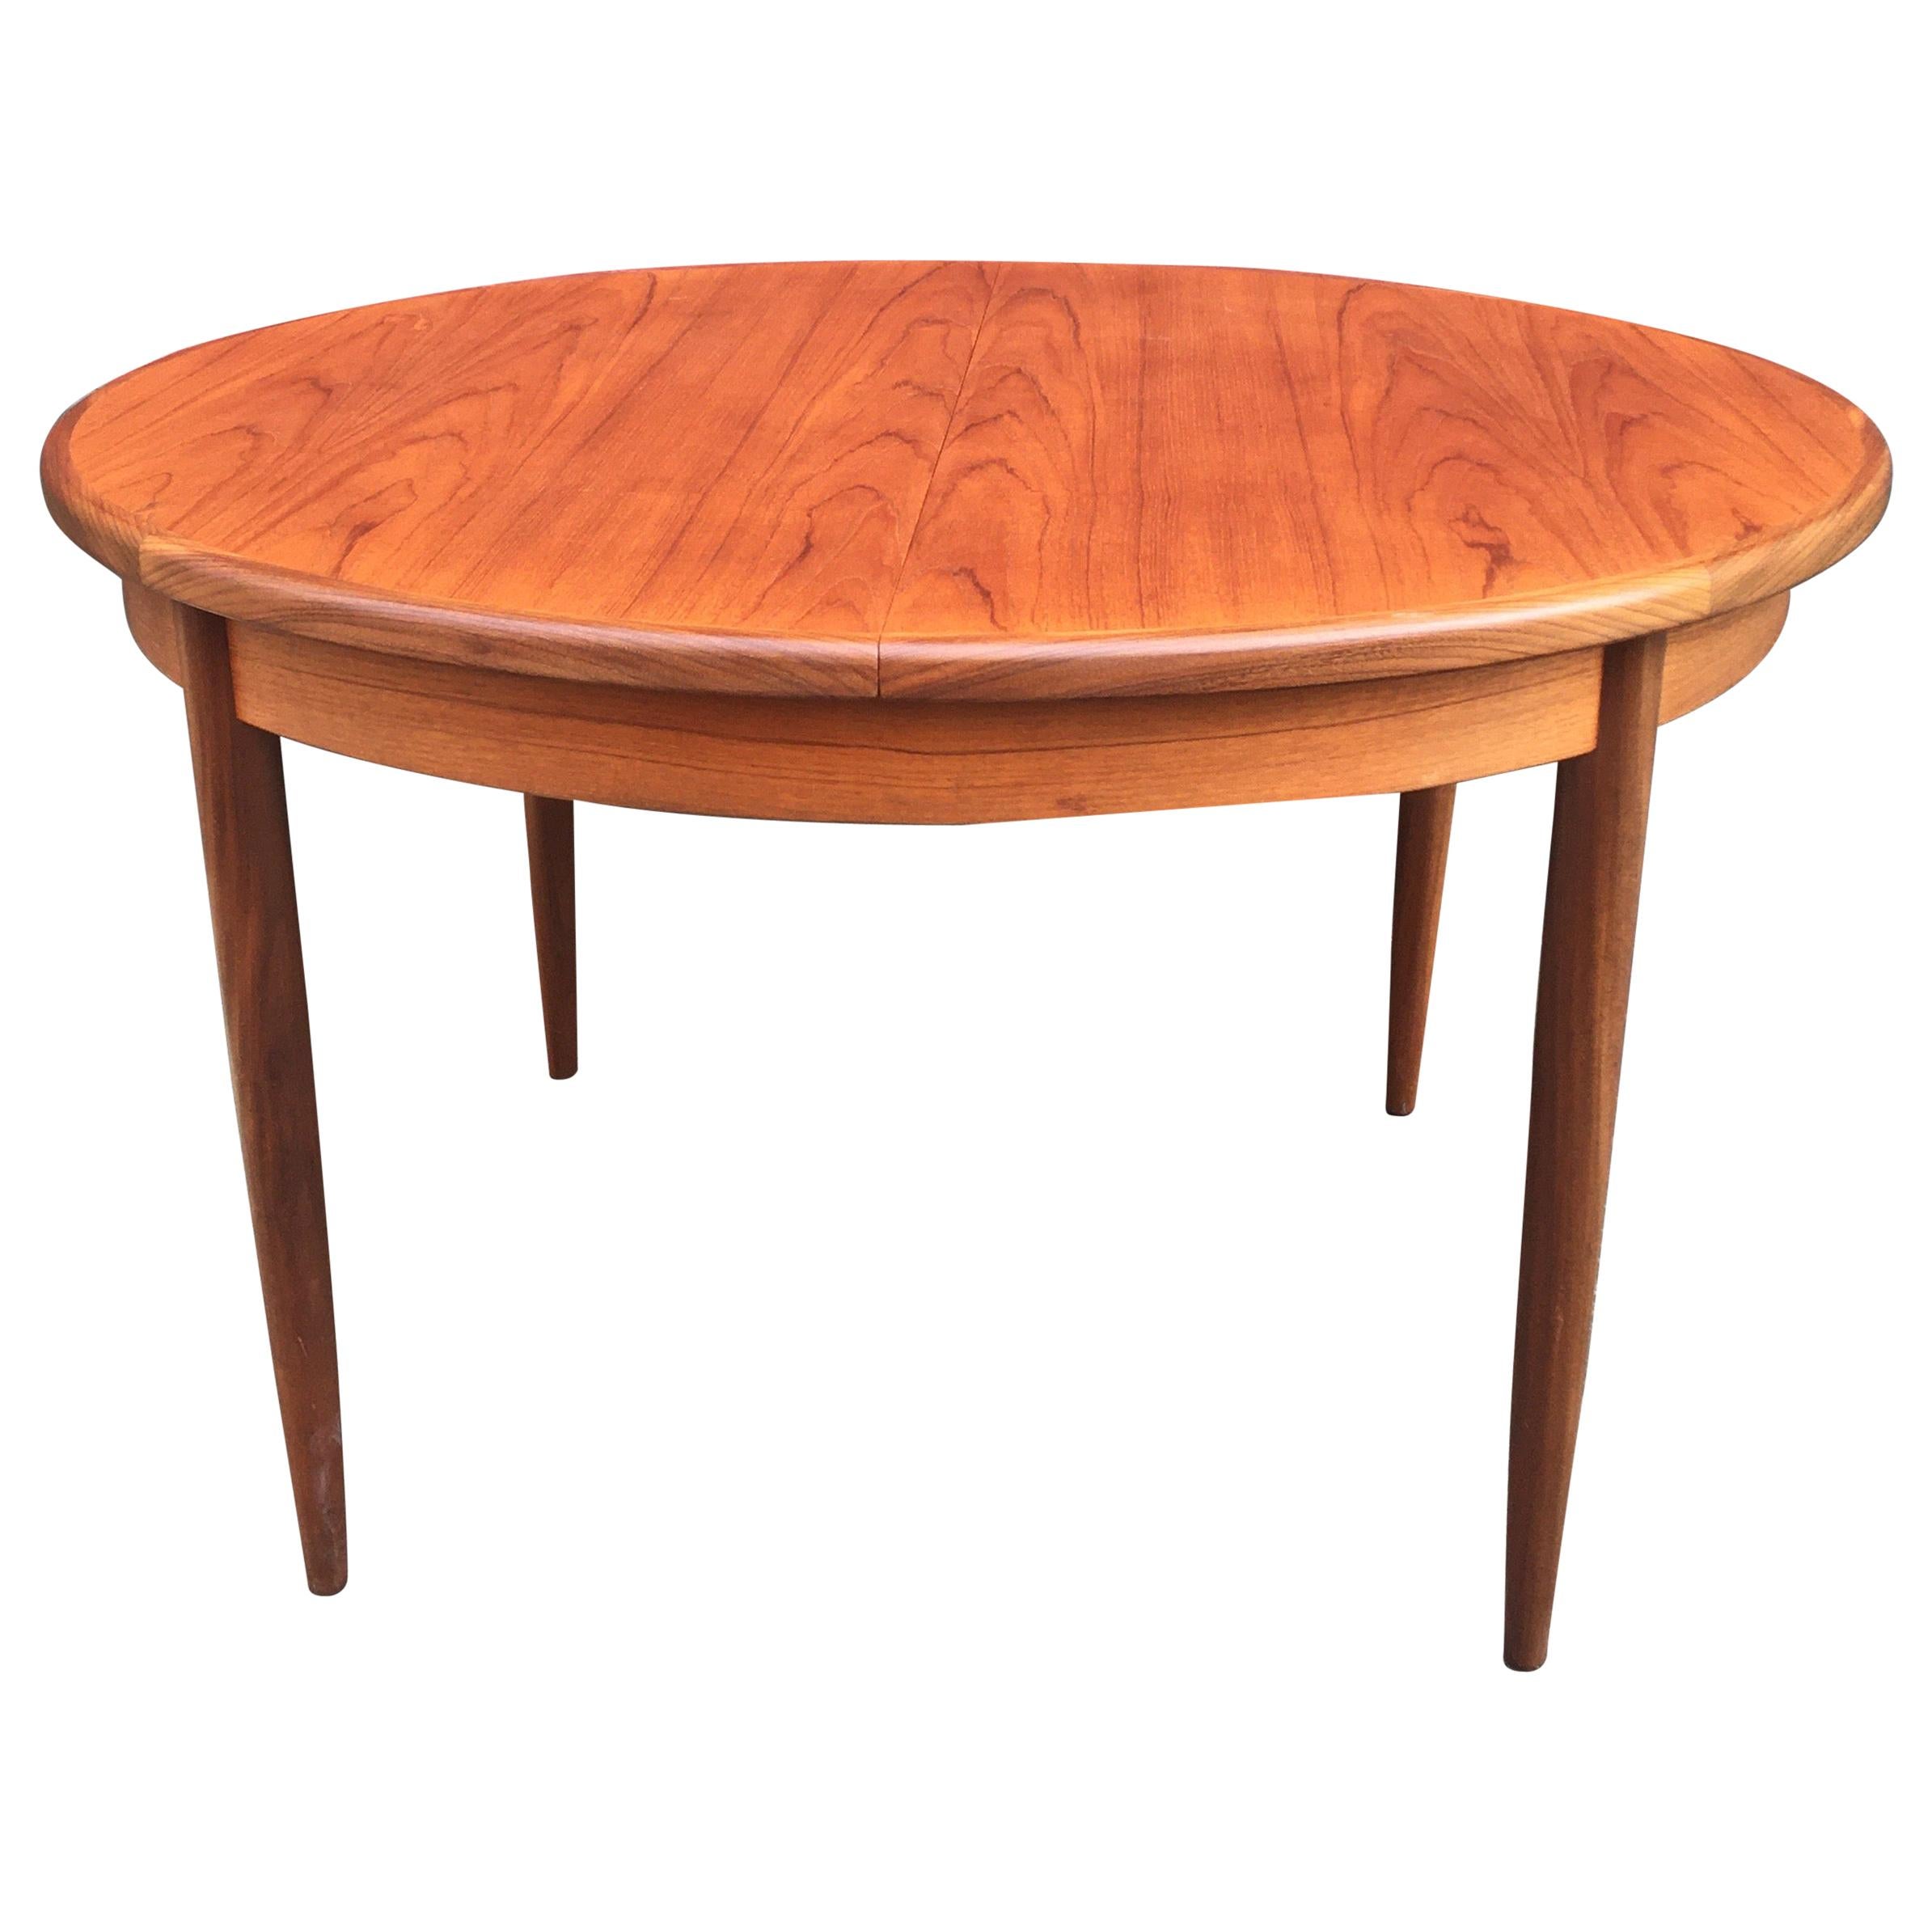 Teak Round/ OVAL Table with Pop Up Leaf G Plan